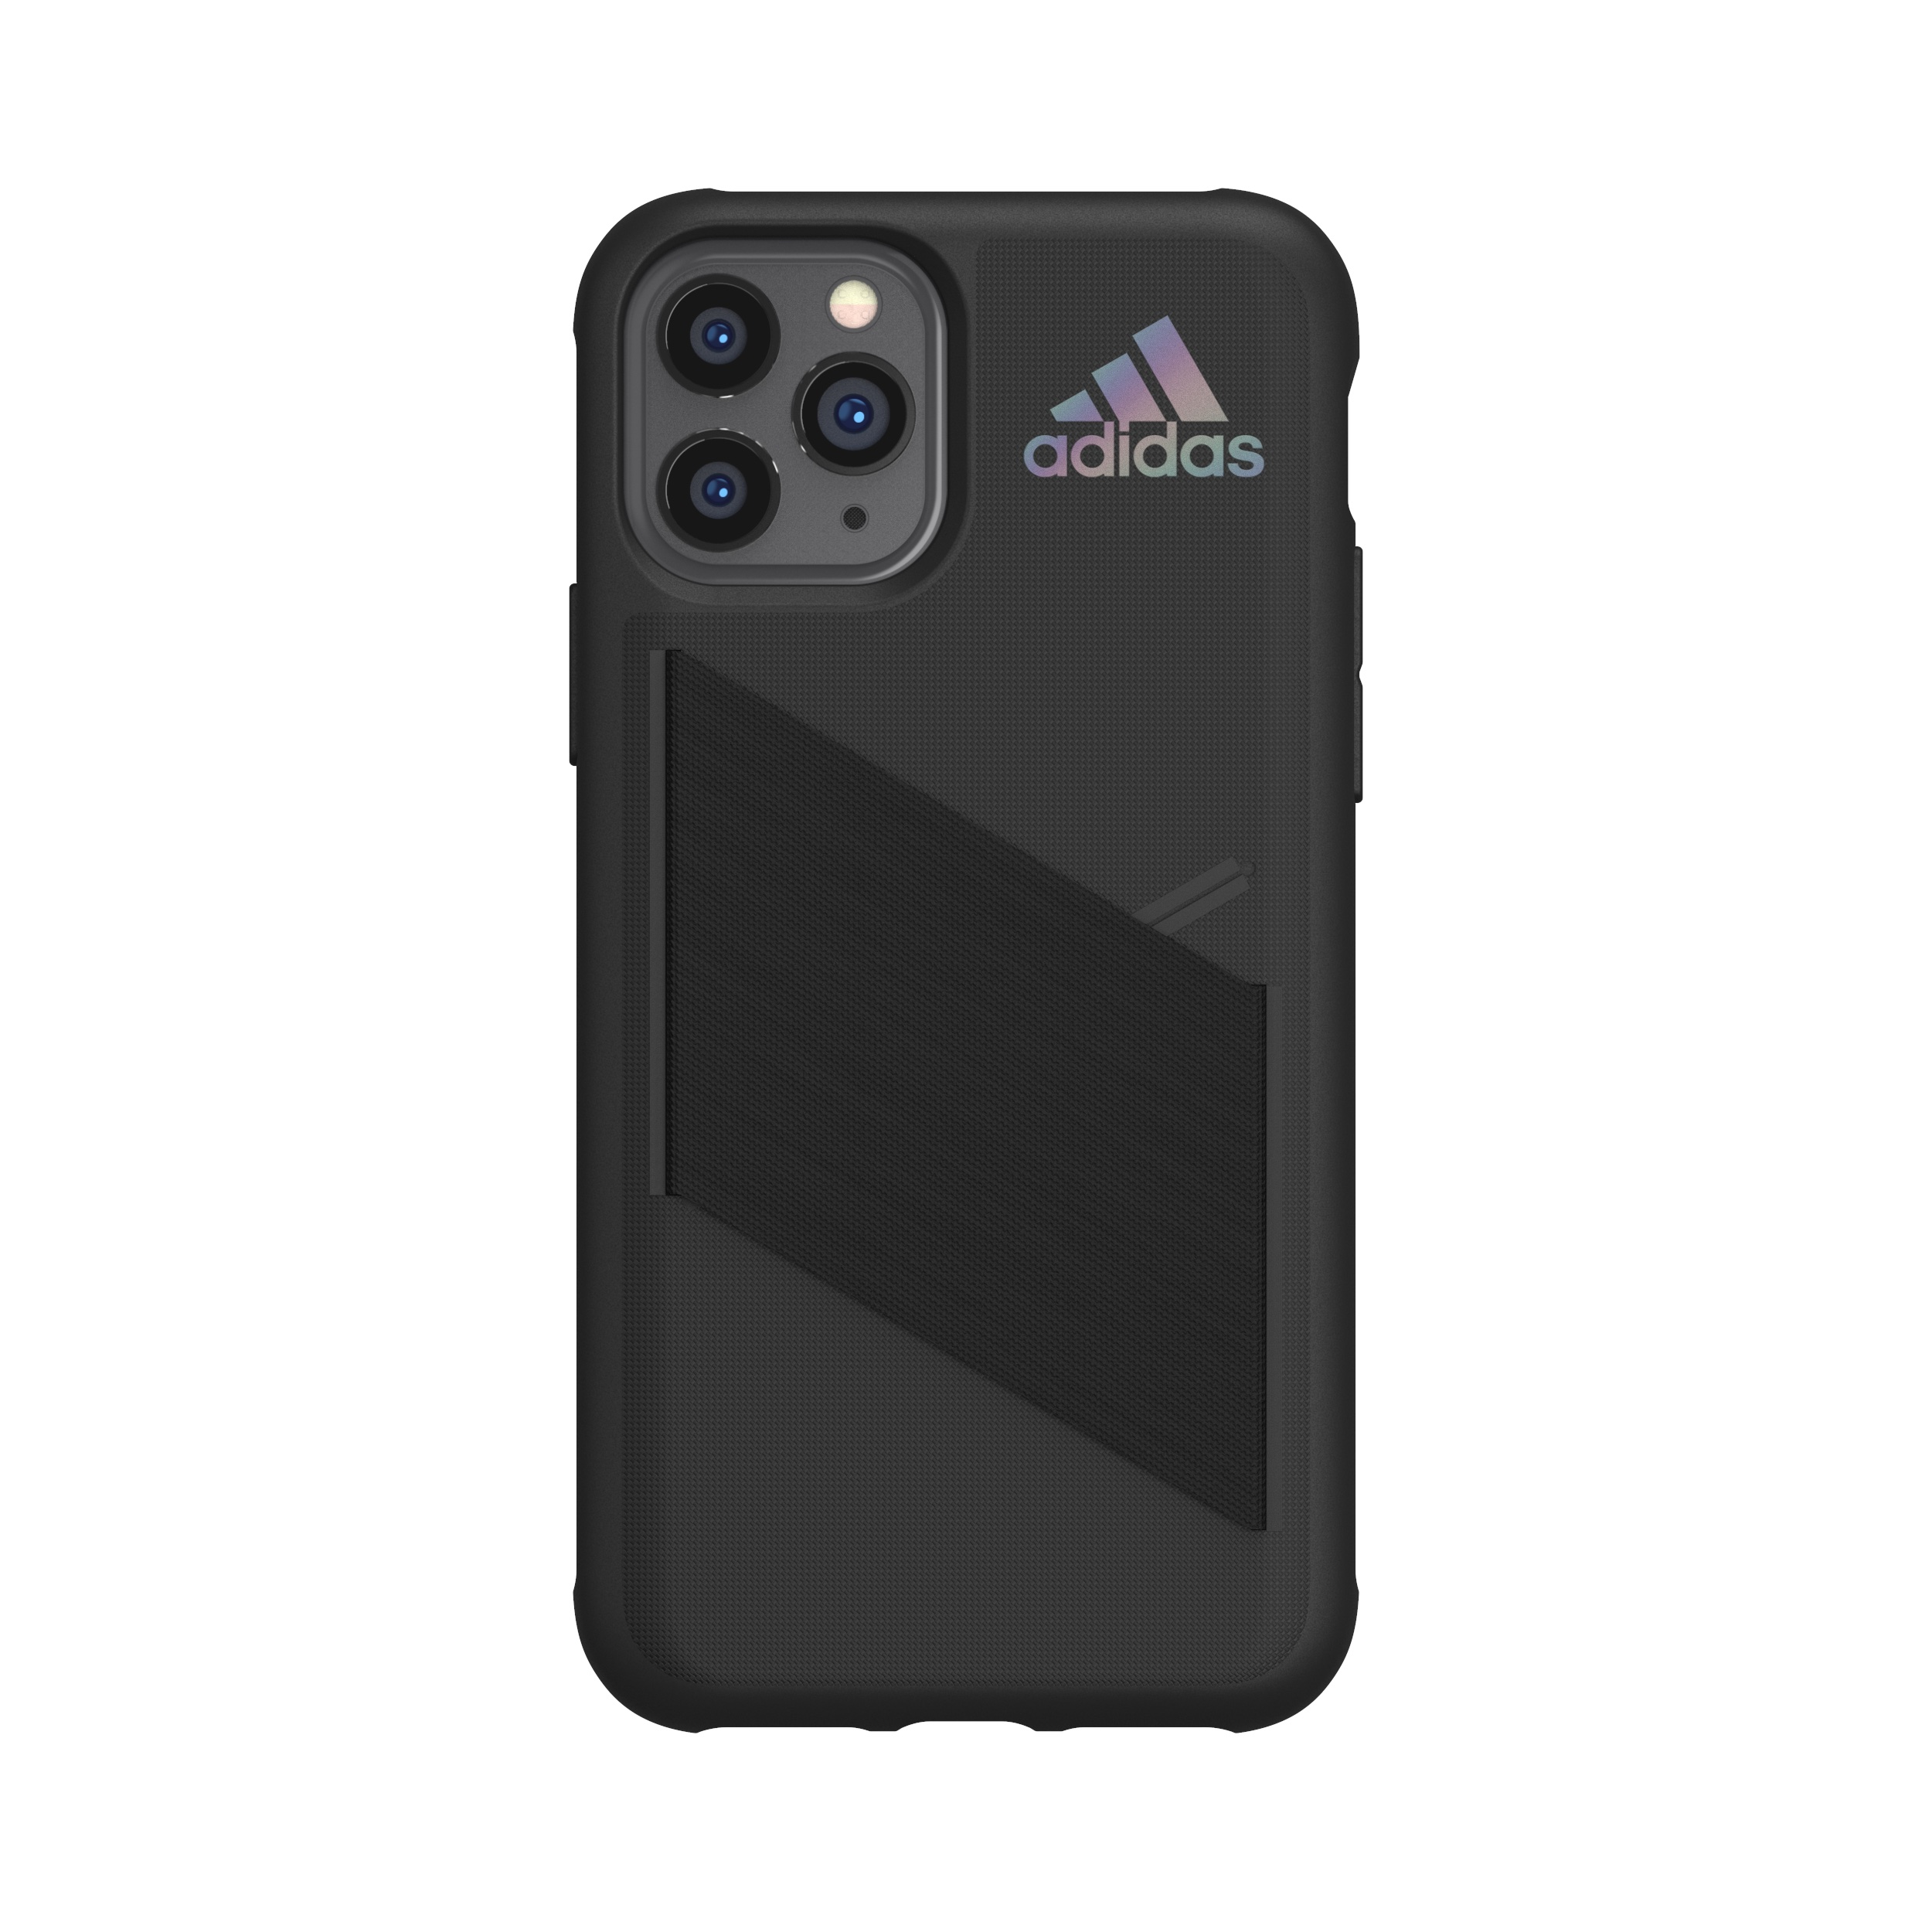 ADIDAS Protective Pocket Case, Backcover, BLACK APPLE, PRO, 11 IPHONE